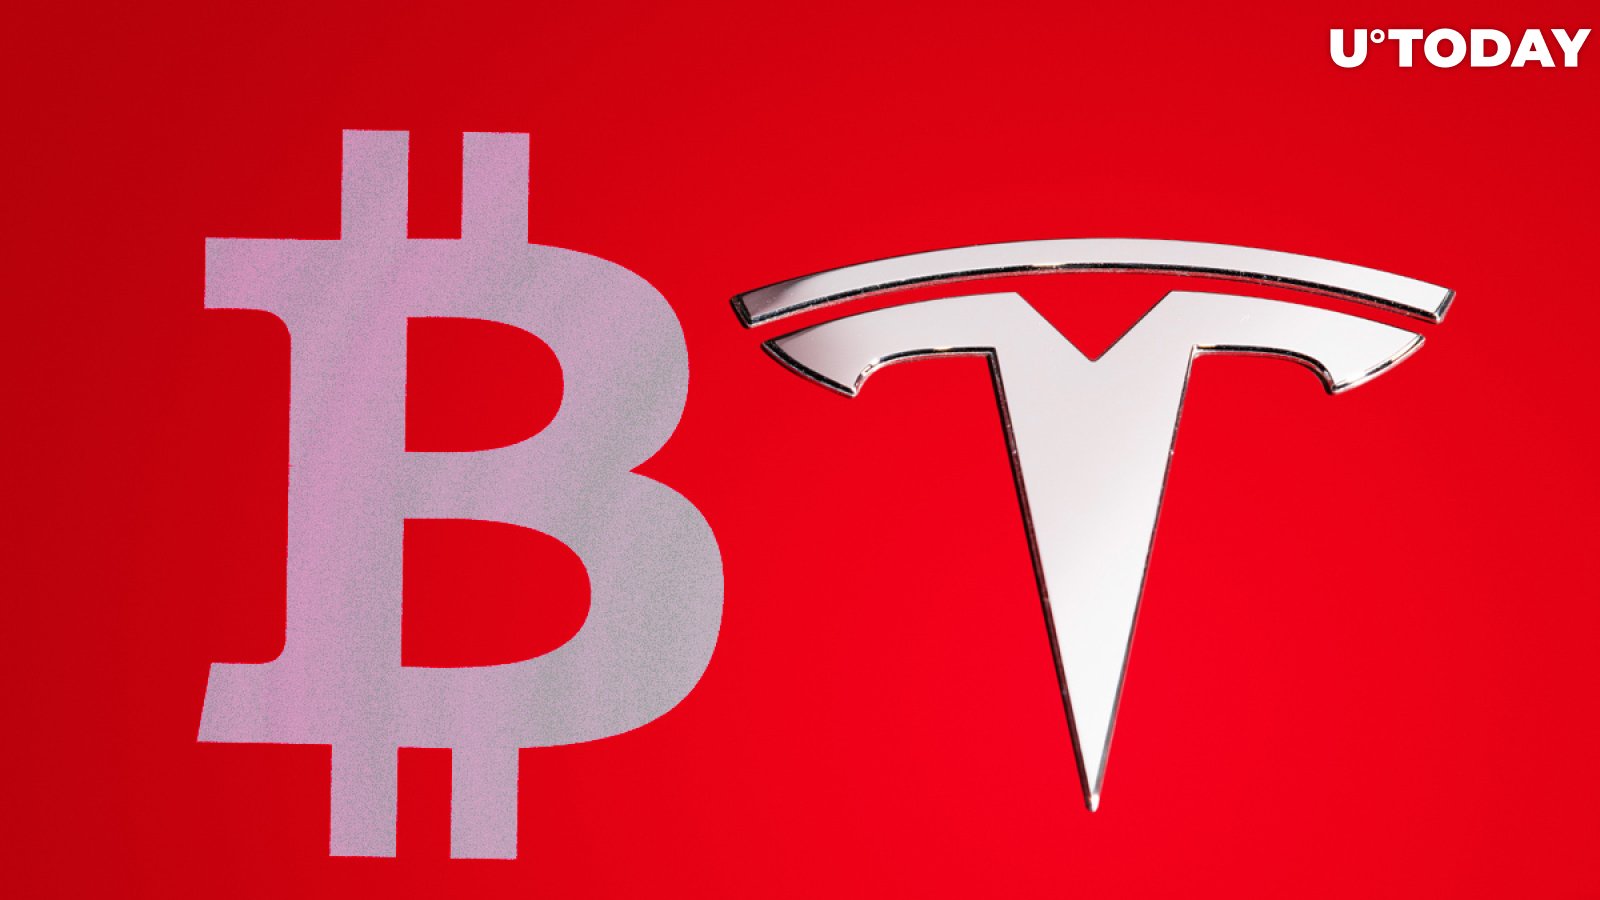 Tesla May Create Its Own System to Accept Bitcoin Payments: Experts